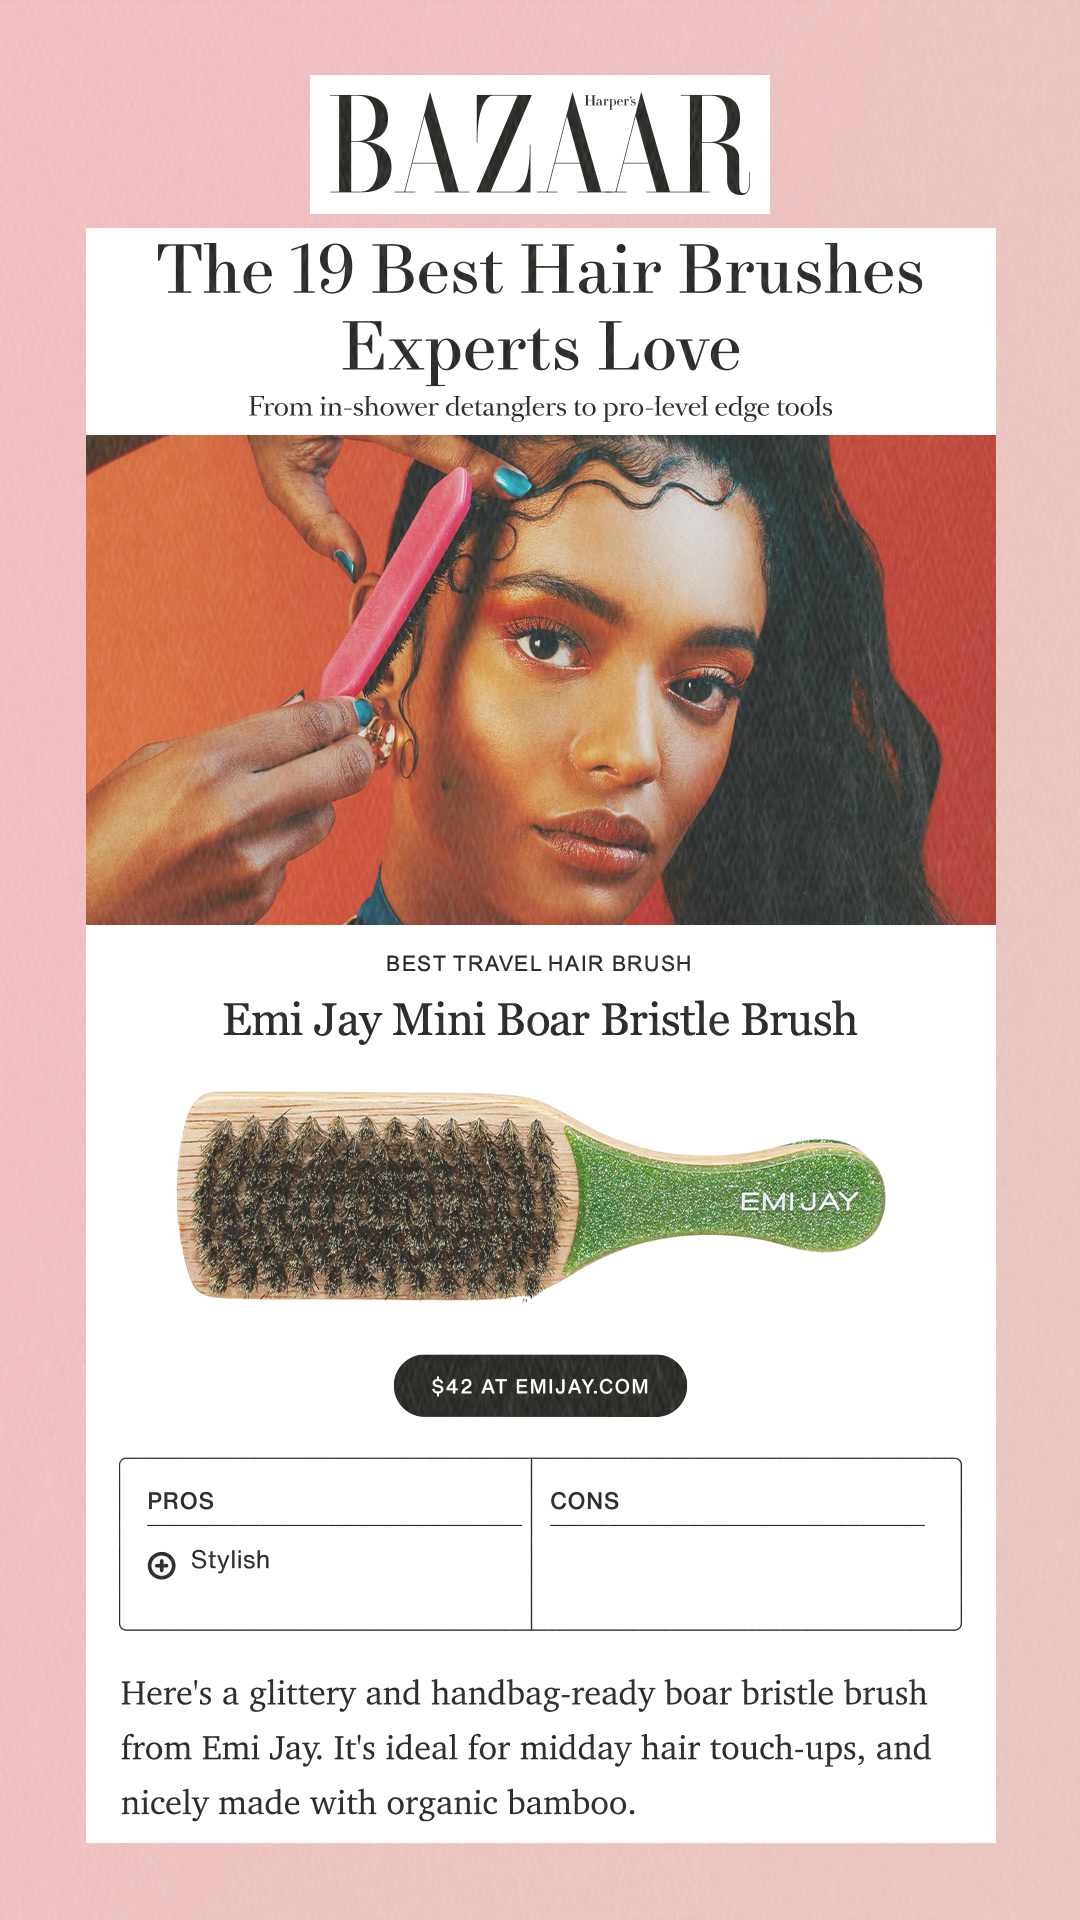 The 19 Best Hair Brushes Experts LoveFrom in-shower detanglers to pro-level edge toolsBest Travel Hair BrushEmi Jay Mini Boar Bristle Brush$42 at emijay.com ProsPro StylishConsHere's a glittery and handbag-ready boar bristle brush from Emi Jay. It's ideal for midday hair touch-ups, and nicely made with organic bamboo.